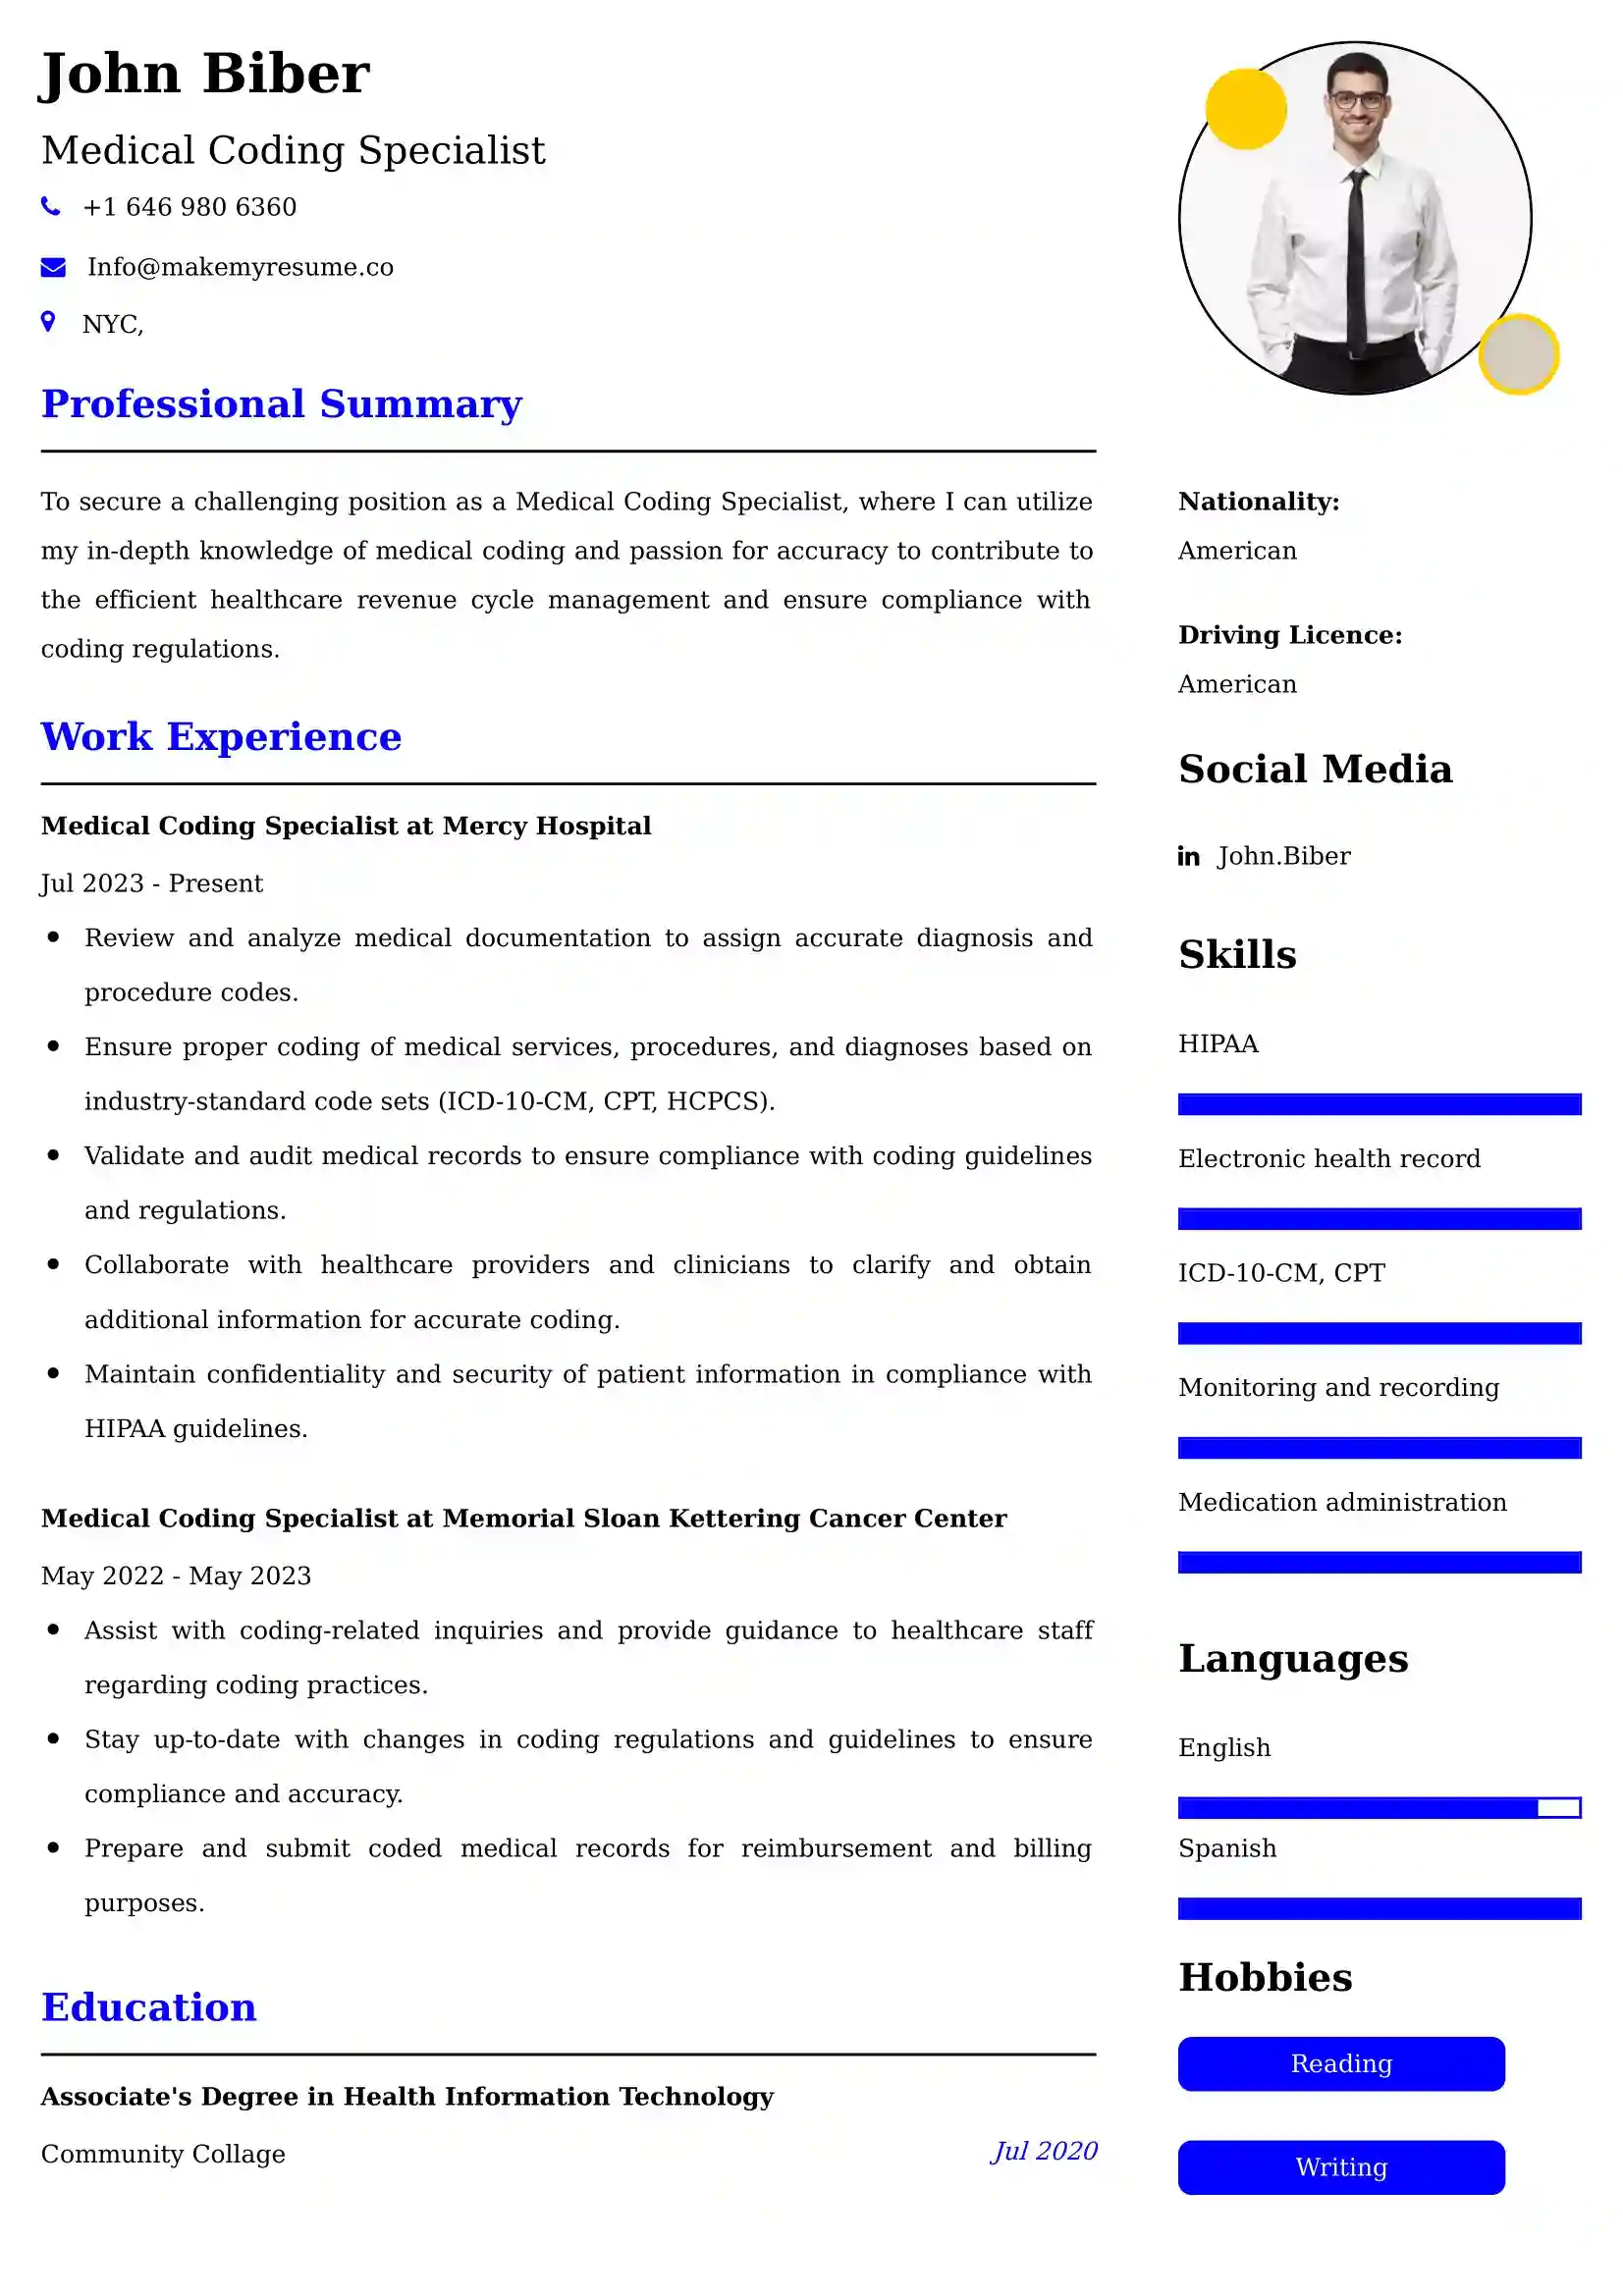 Medical Coding Specialist Resume Examples Canada